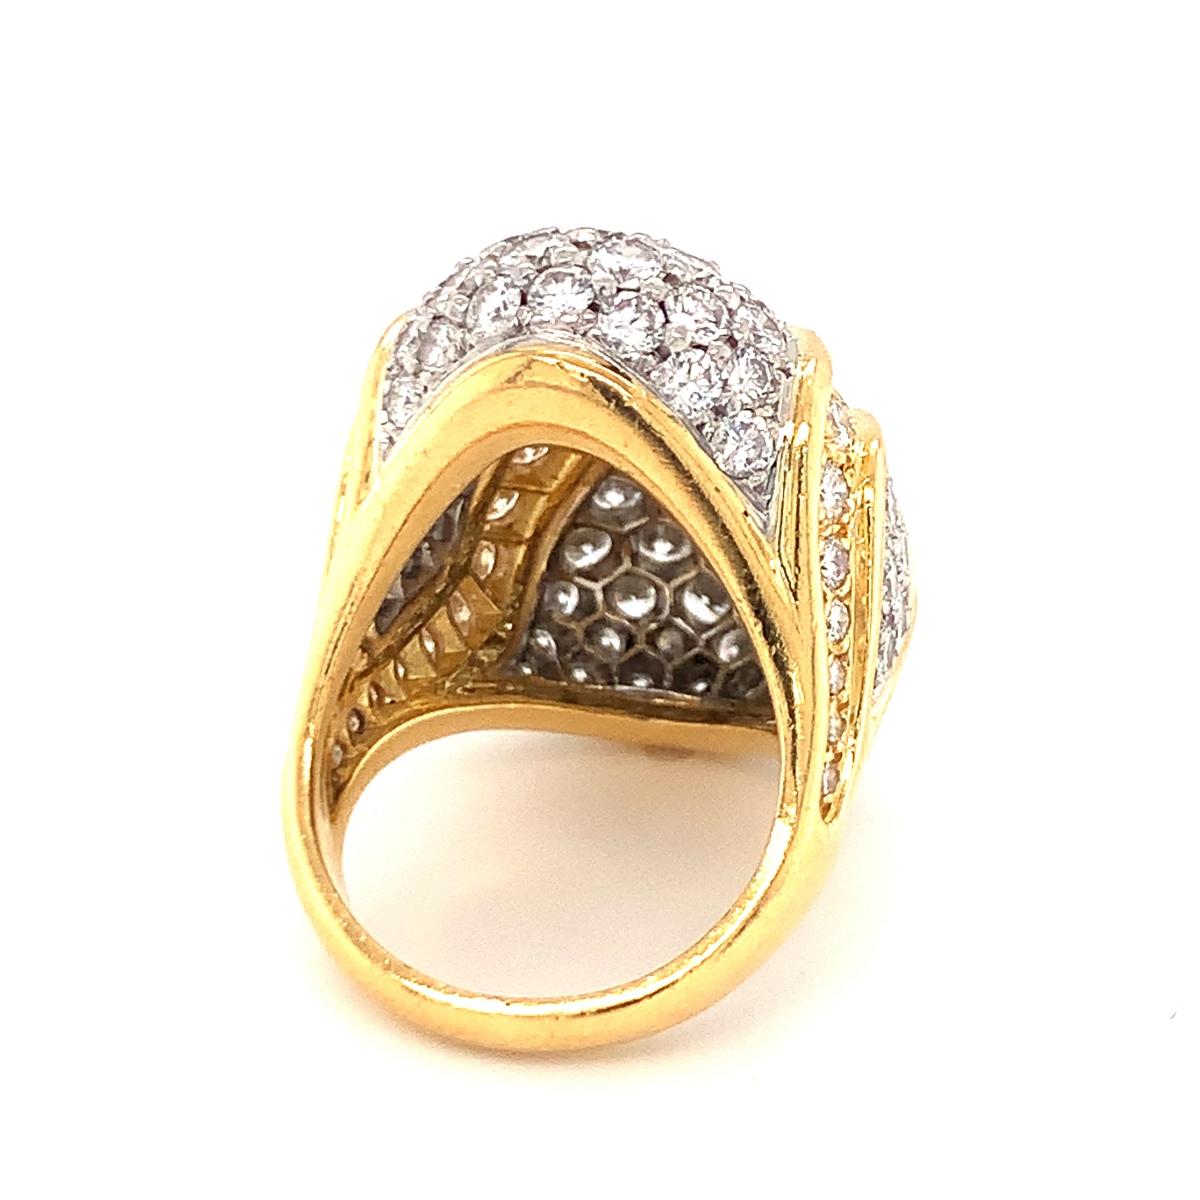 Women's Diamond Dome Ring in Platinum and 18K Yellow Gold, circa 1960s For Sale